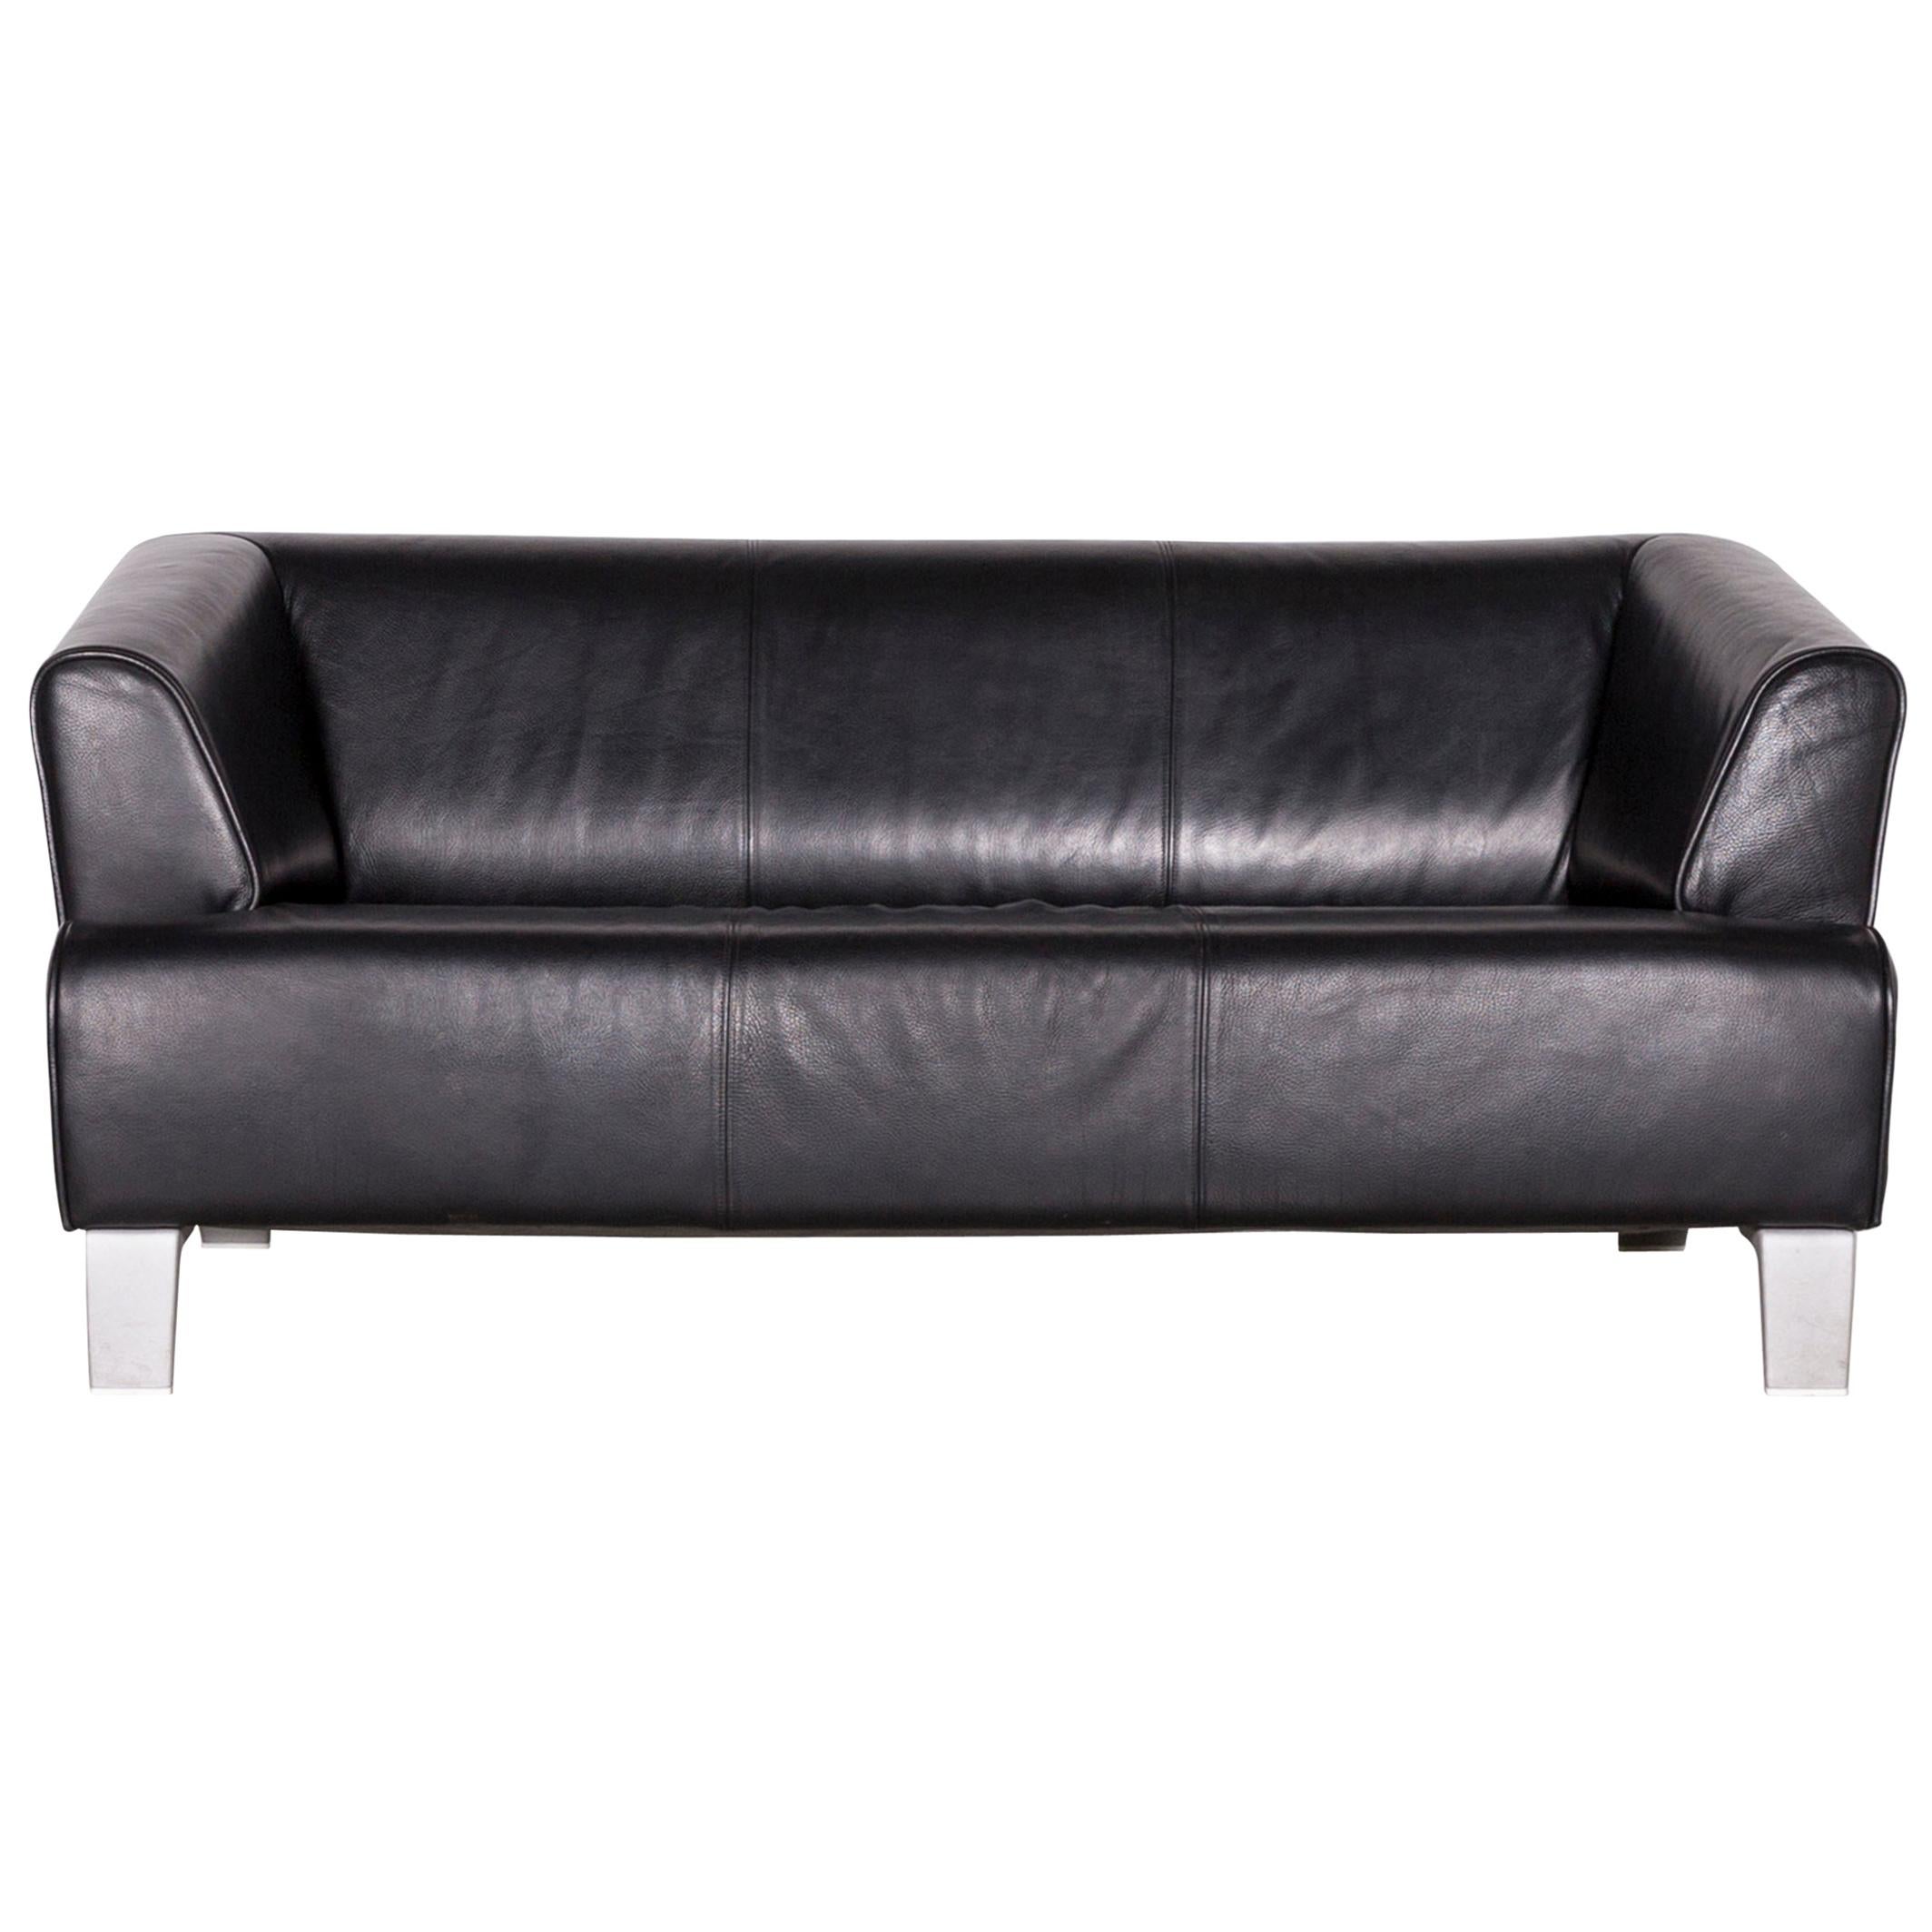 Rolf Benz 2300 Designer Sofa Black Two-Seat Leather Couch